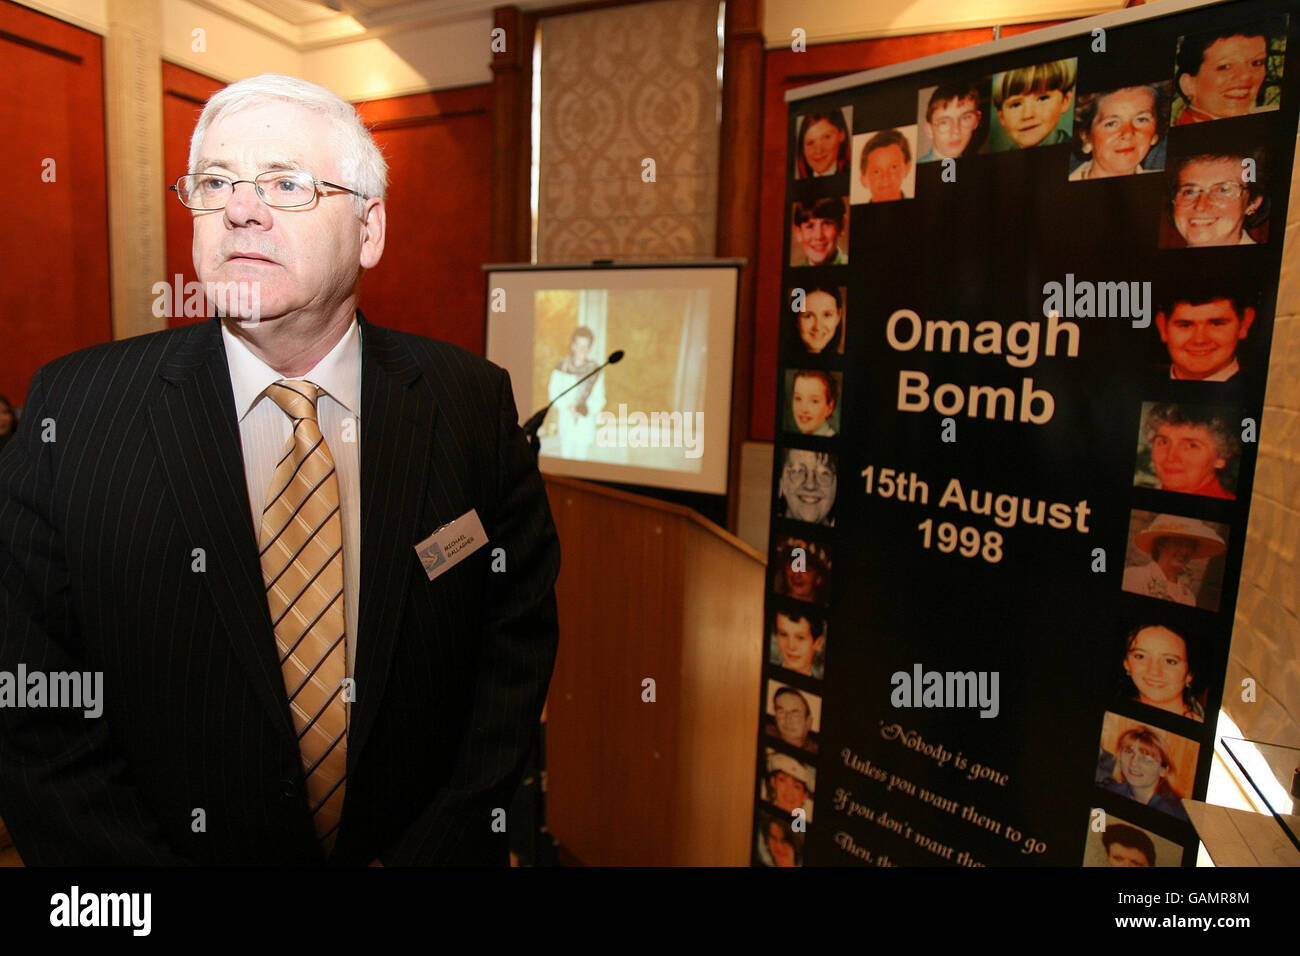 Michael Gallagher, Chairman of the Omagh support and self help group, at Parliament Buildings Stormont, Belfast. Stock Photo